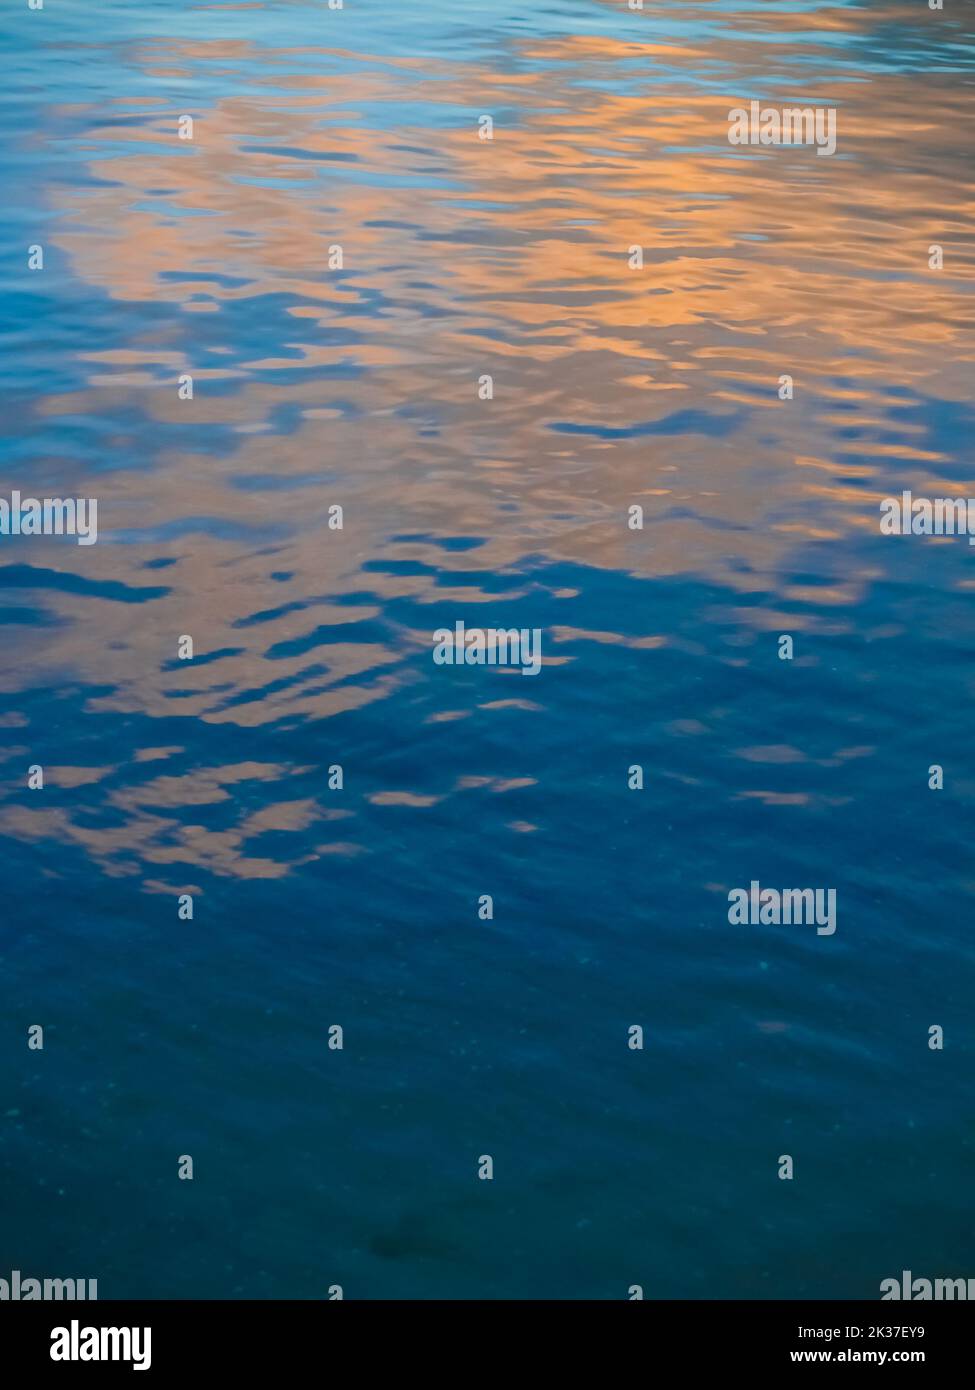 Sunrise sky reflected in calm water in blue and gold abstract Stock Photo